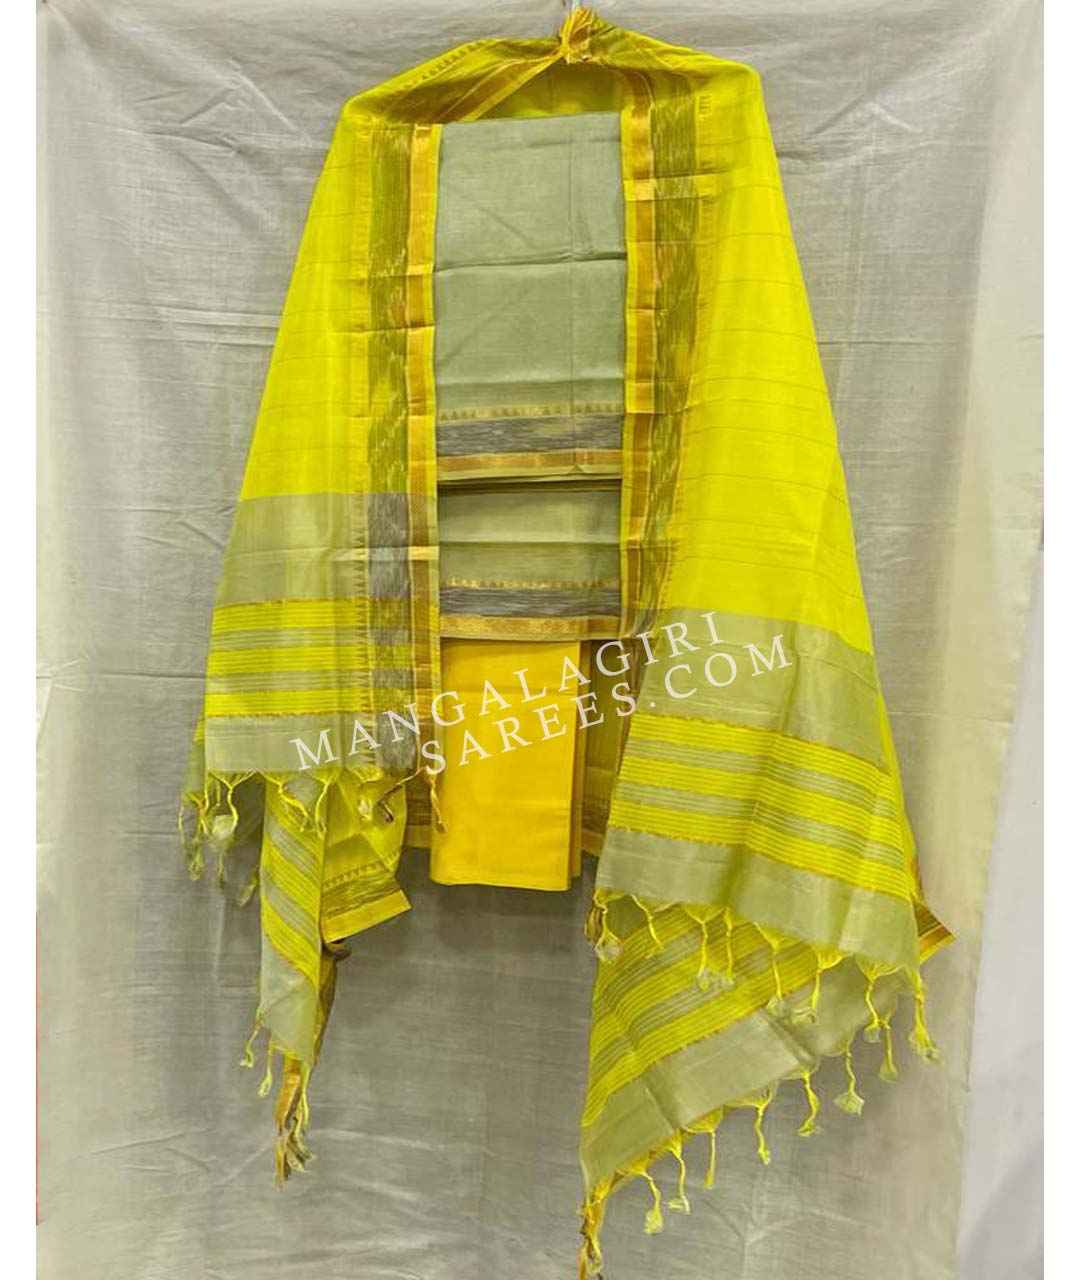 Buy Handloom Cotton Dress Material With Dupatta at Amazon.in